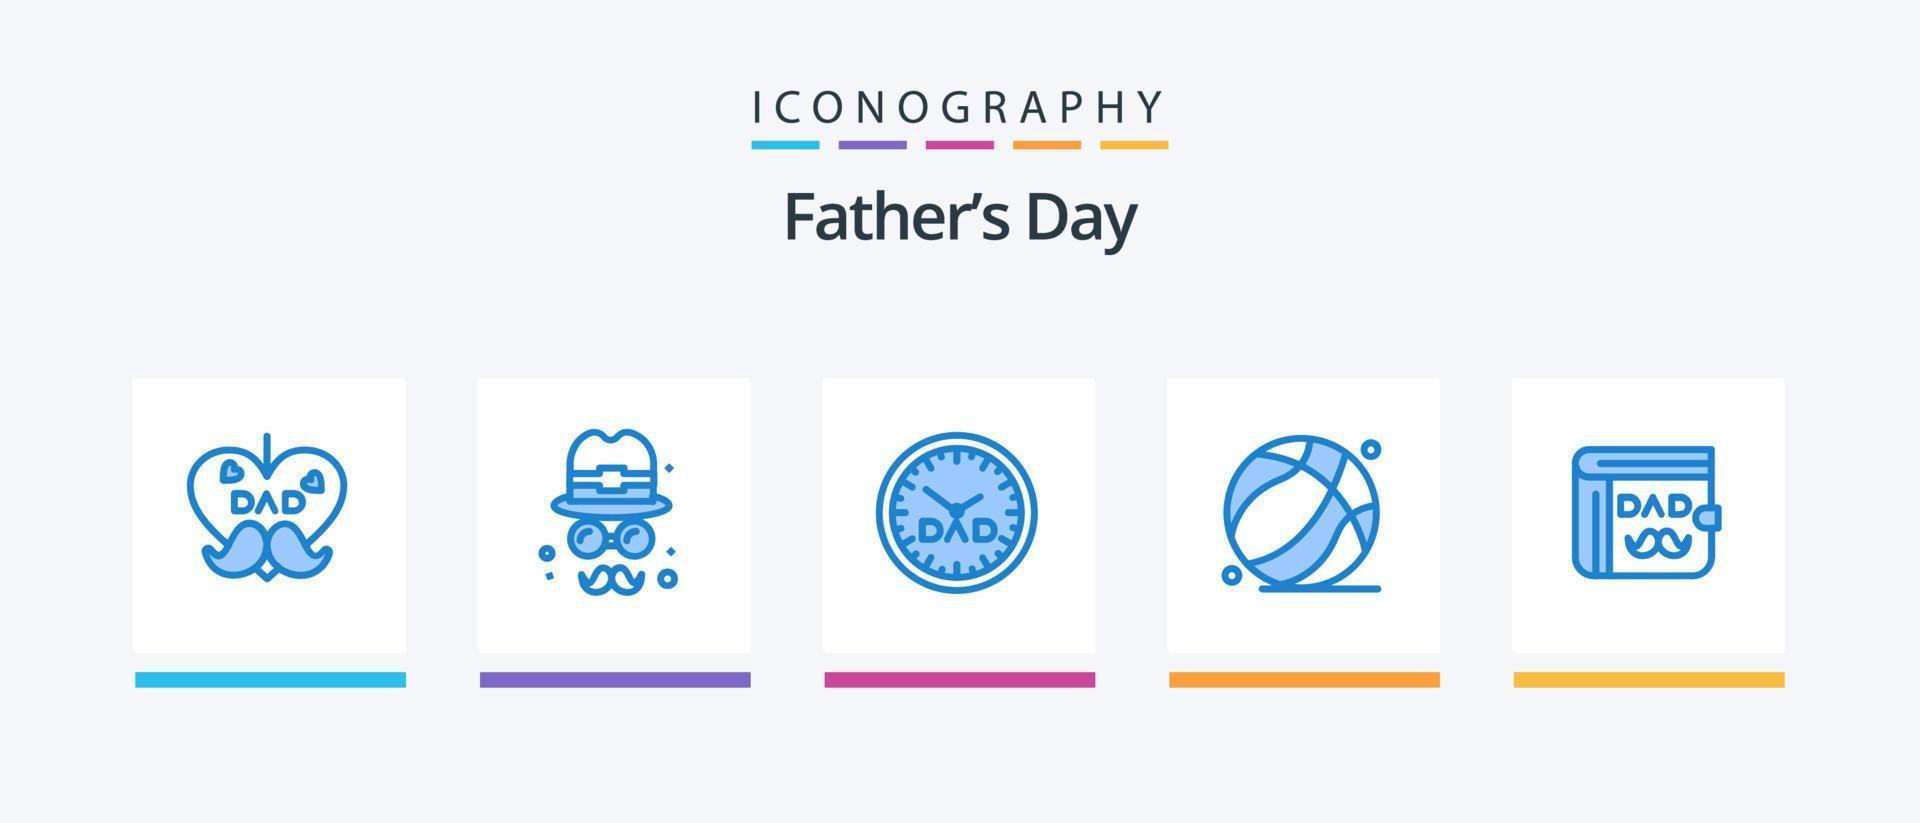 Fathers Day Blue 5 Icon Pack Including dad. fathers day. clock. father. basket ball. Creative Icons Design vector